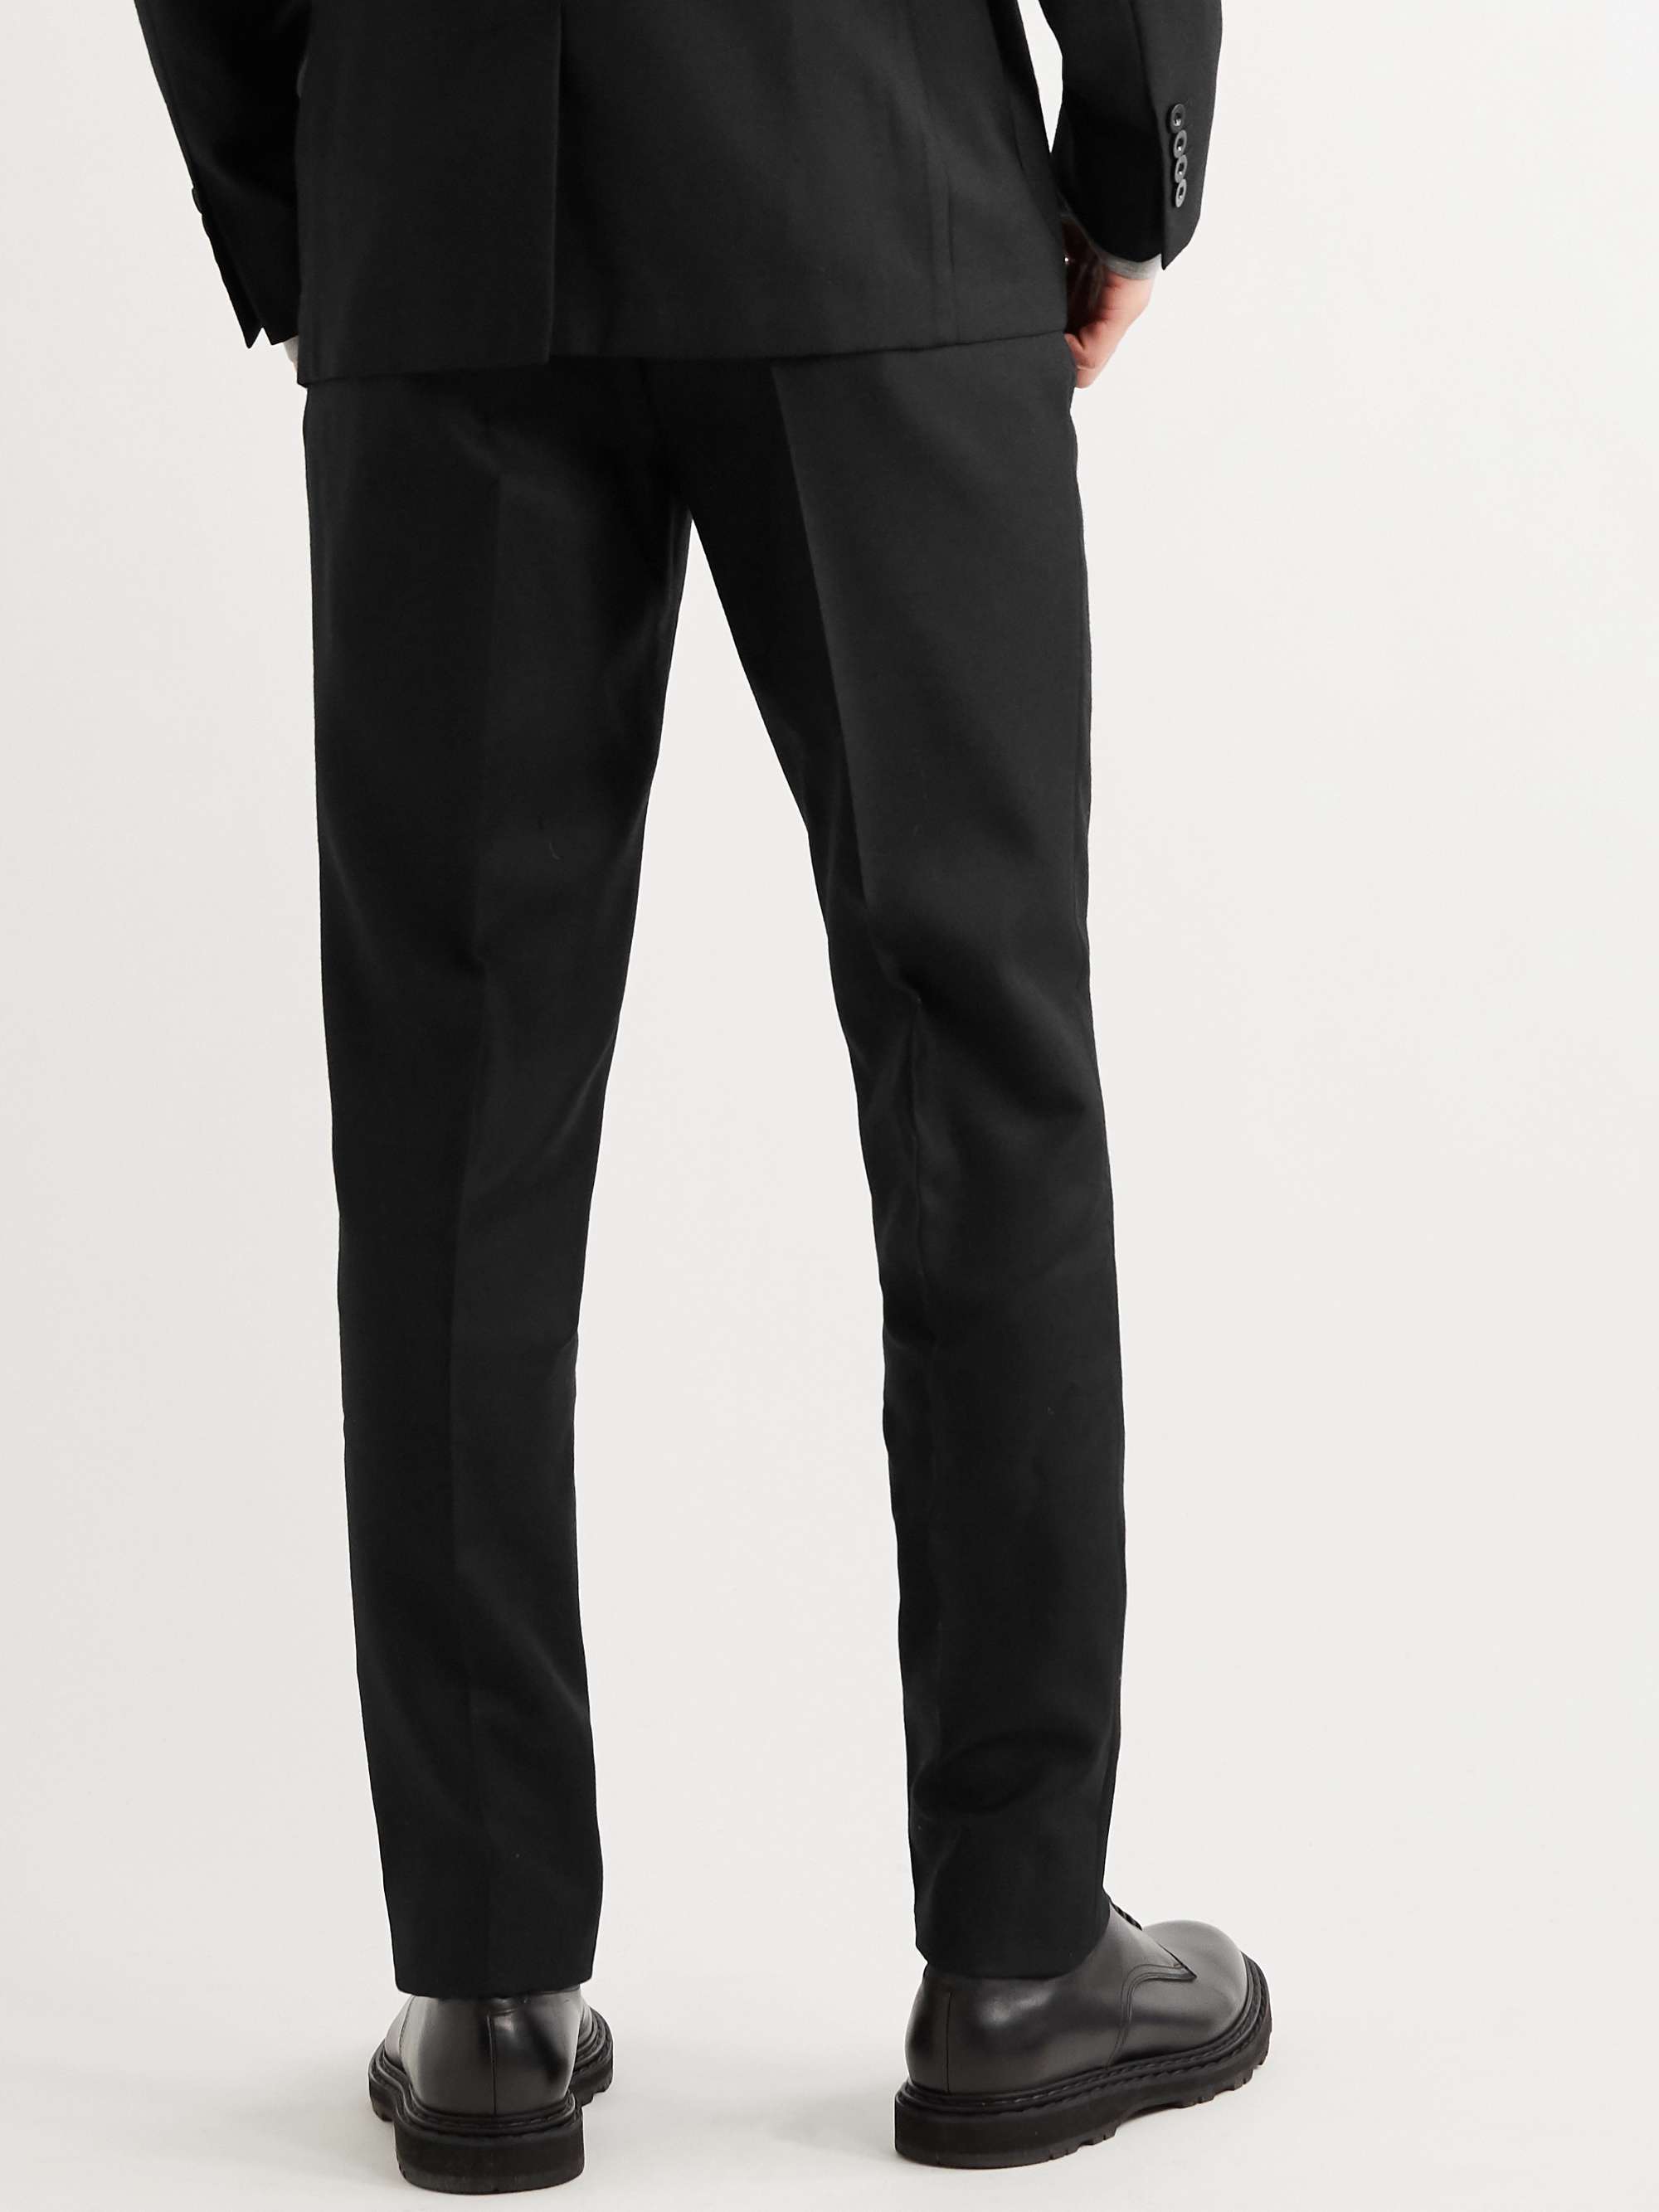 MR P. Slim-Fit Navy Worsted Wool Trousers